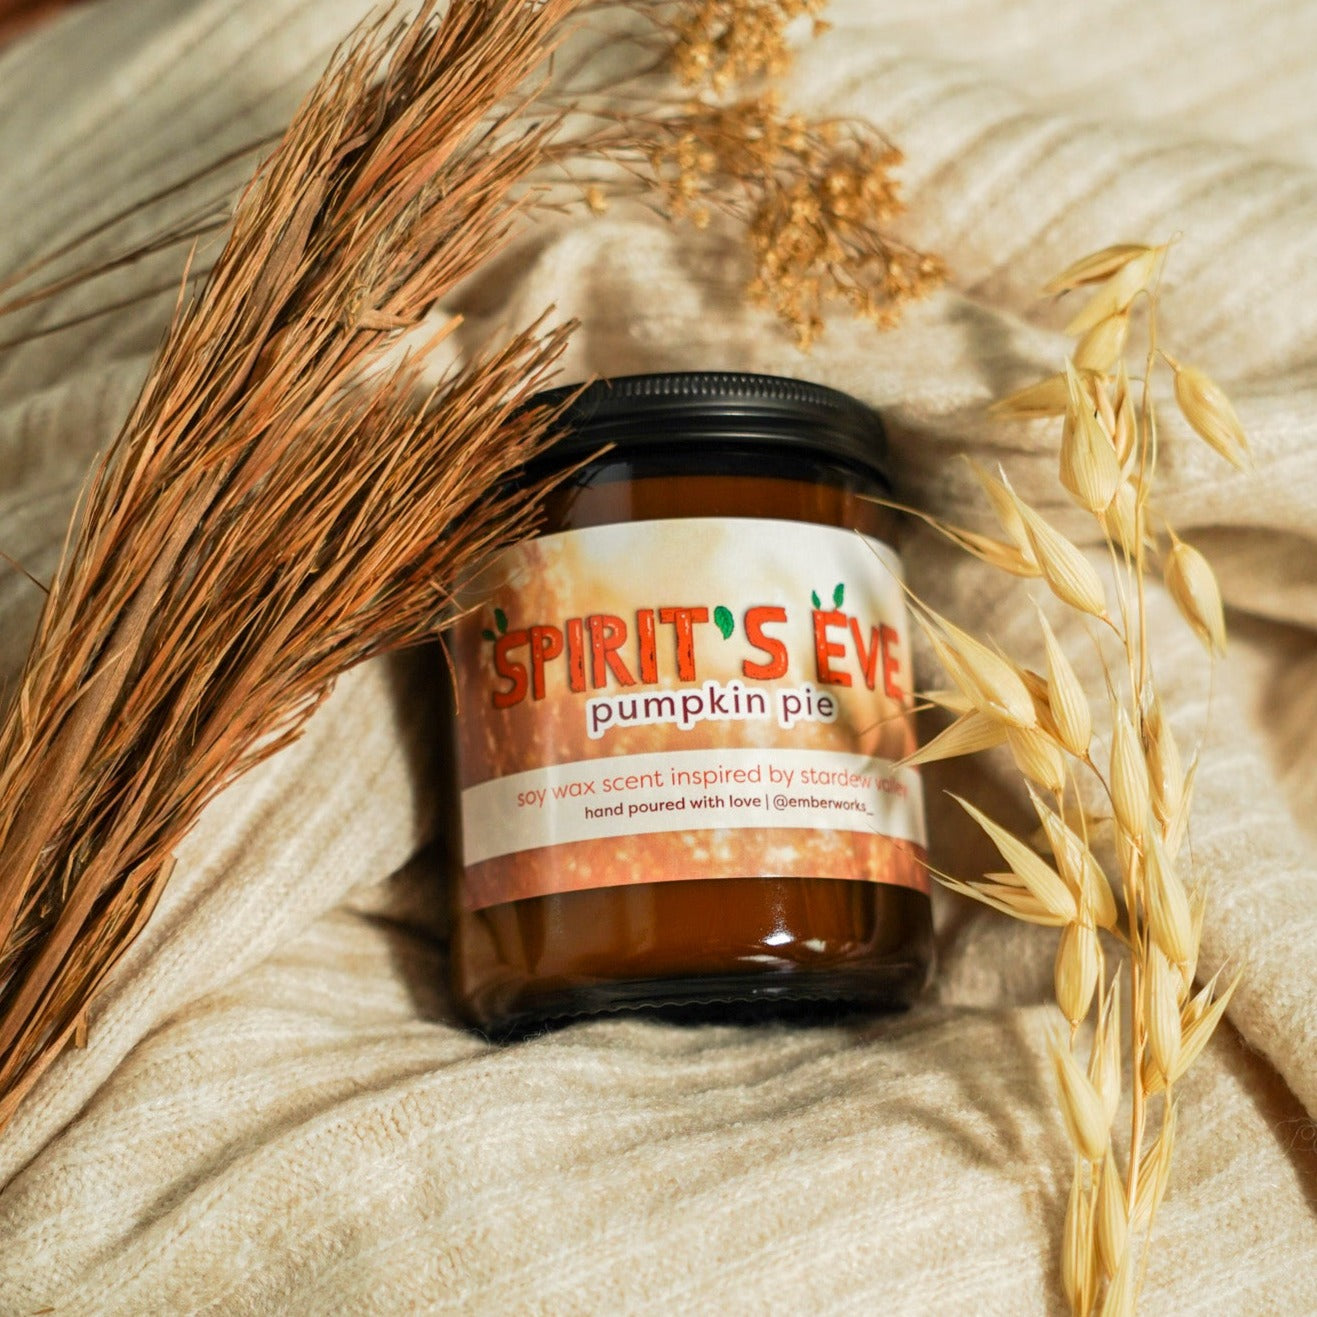 Sprit's Eve - A Stardew Valley Inspired Candle